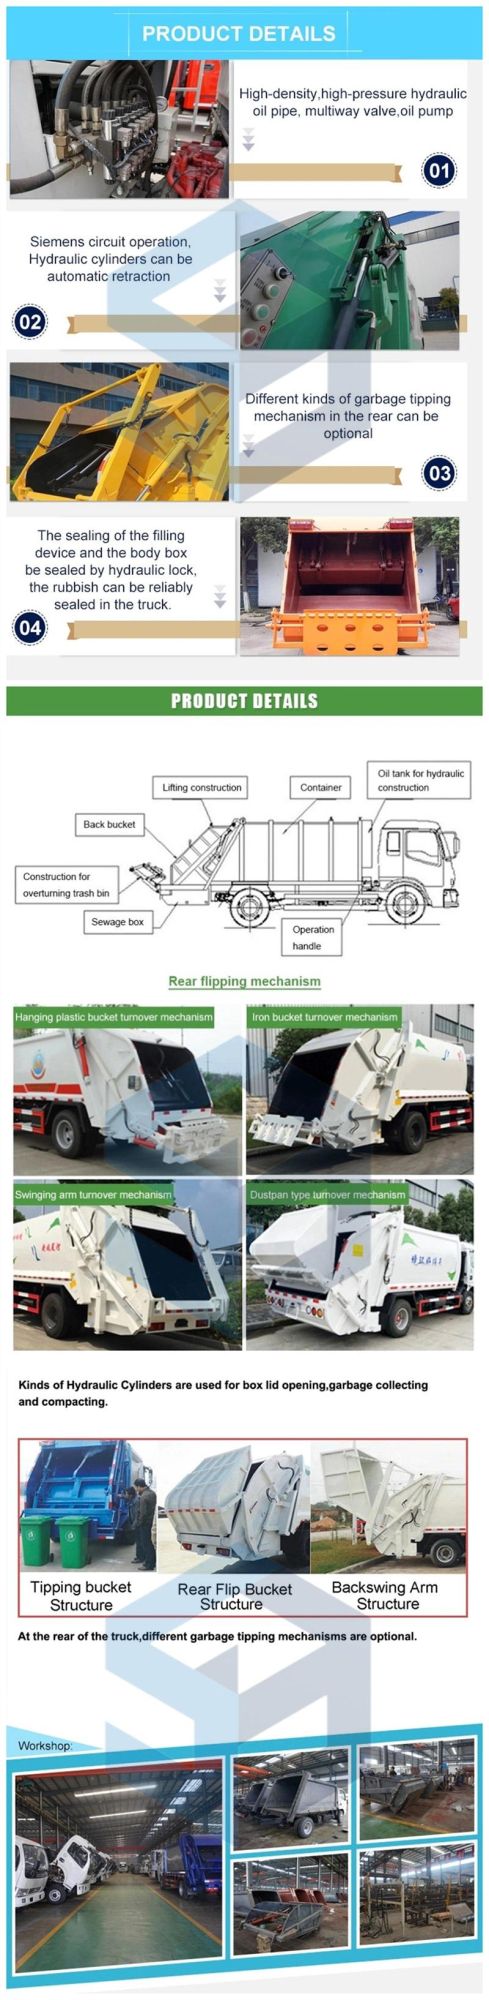 12 Cbm Dongfeng Wastecompactor Roll on Roll off Garbage Compactor Truck